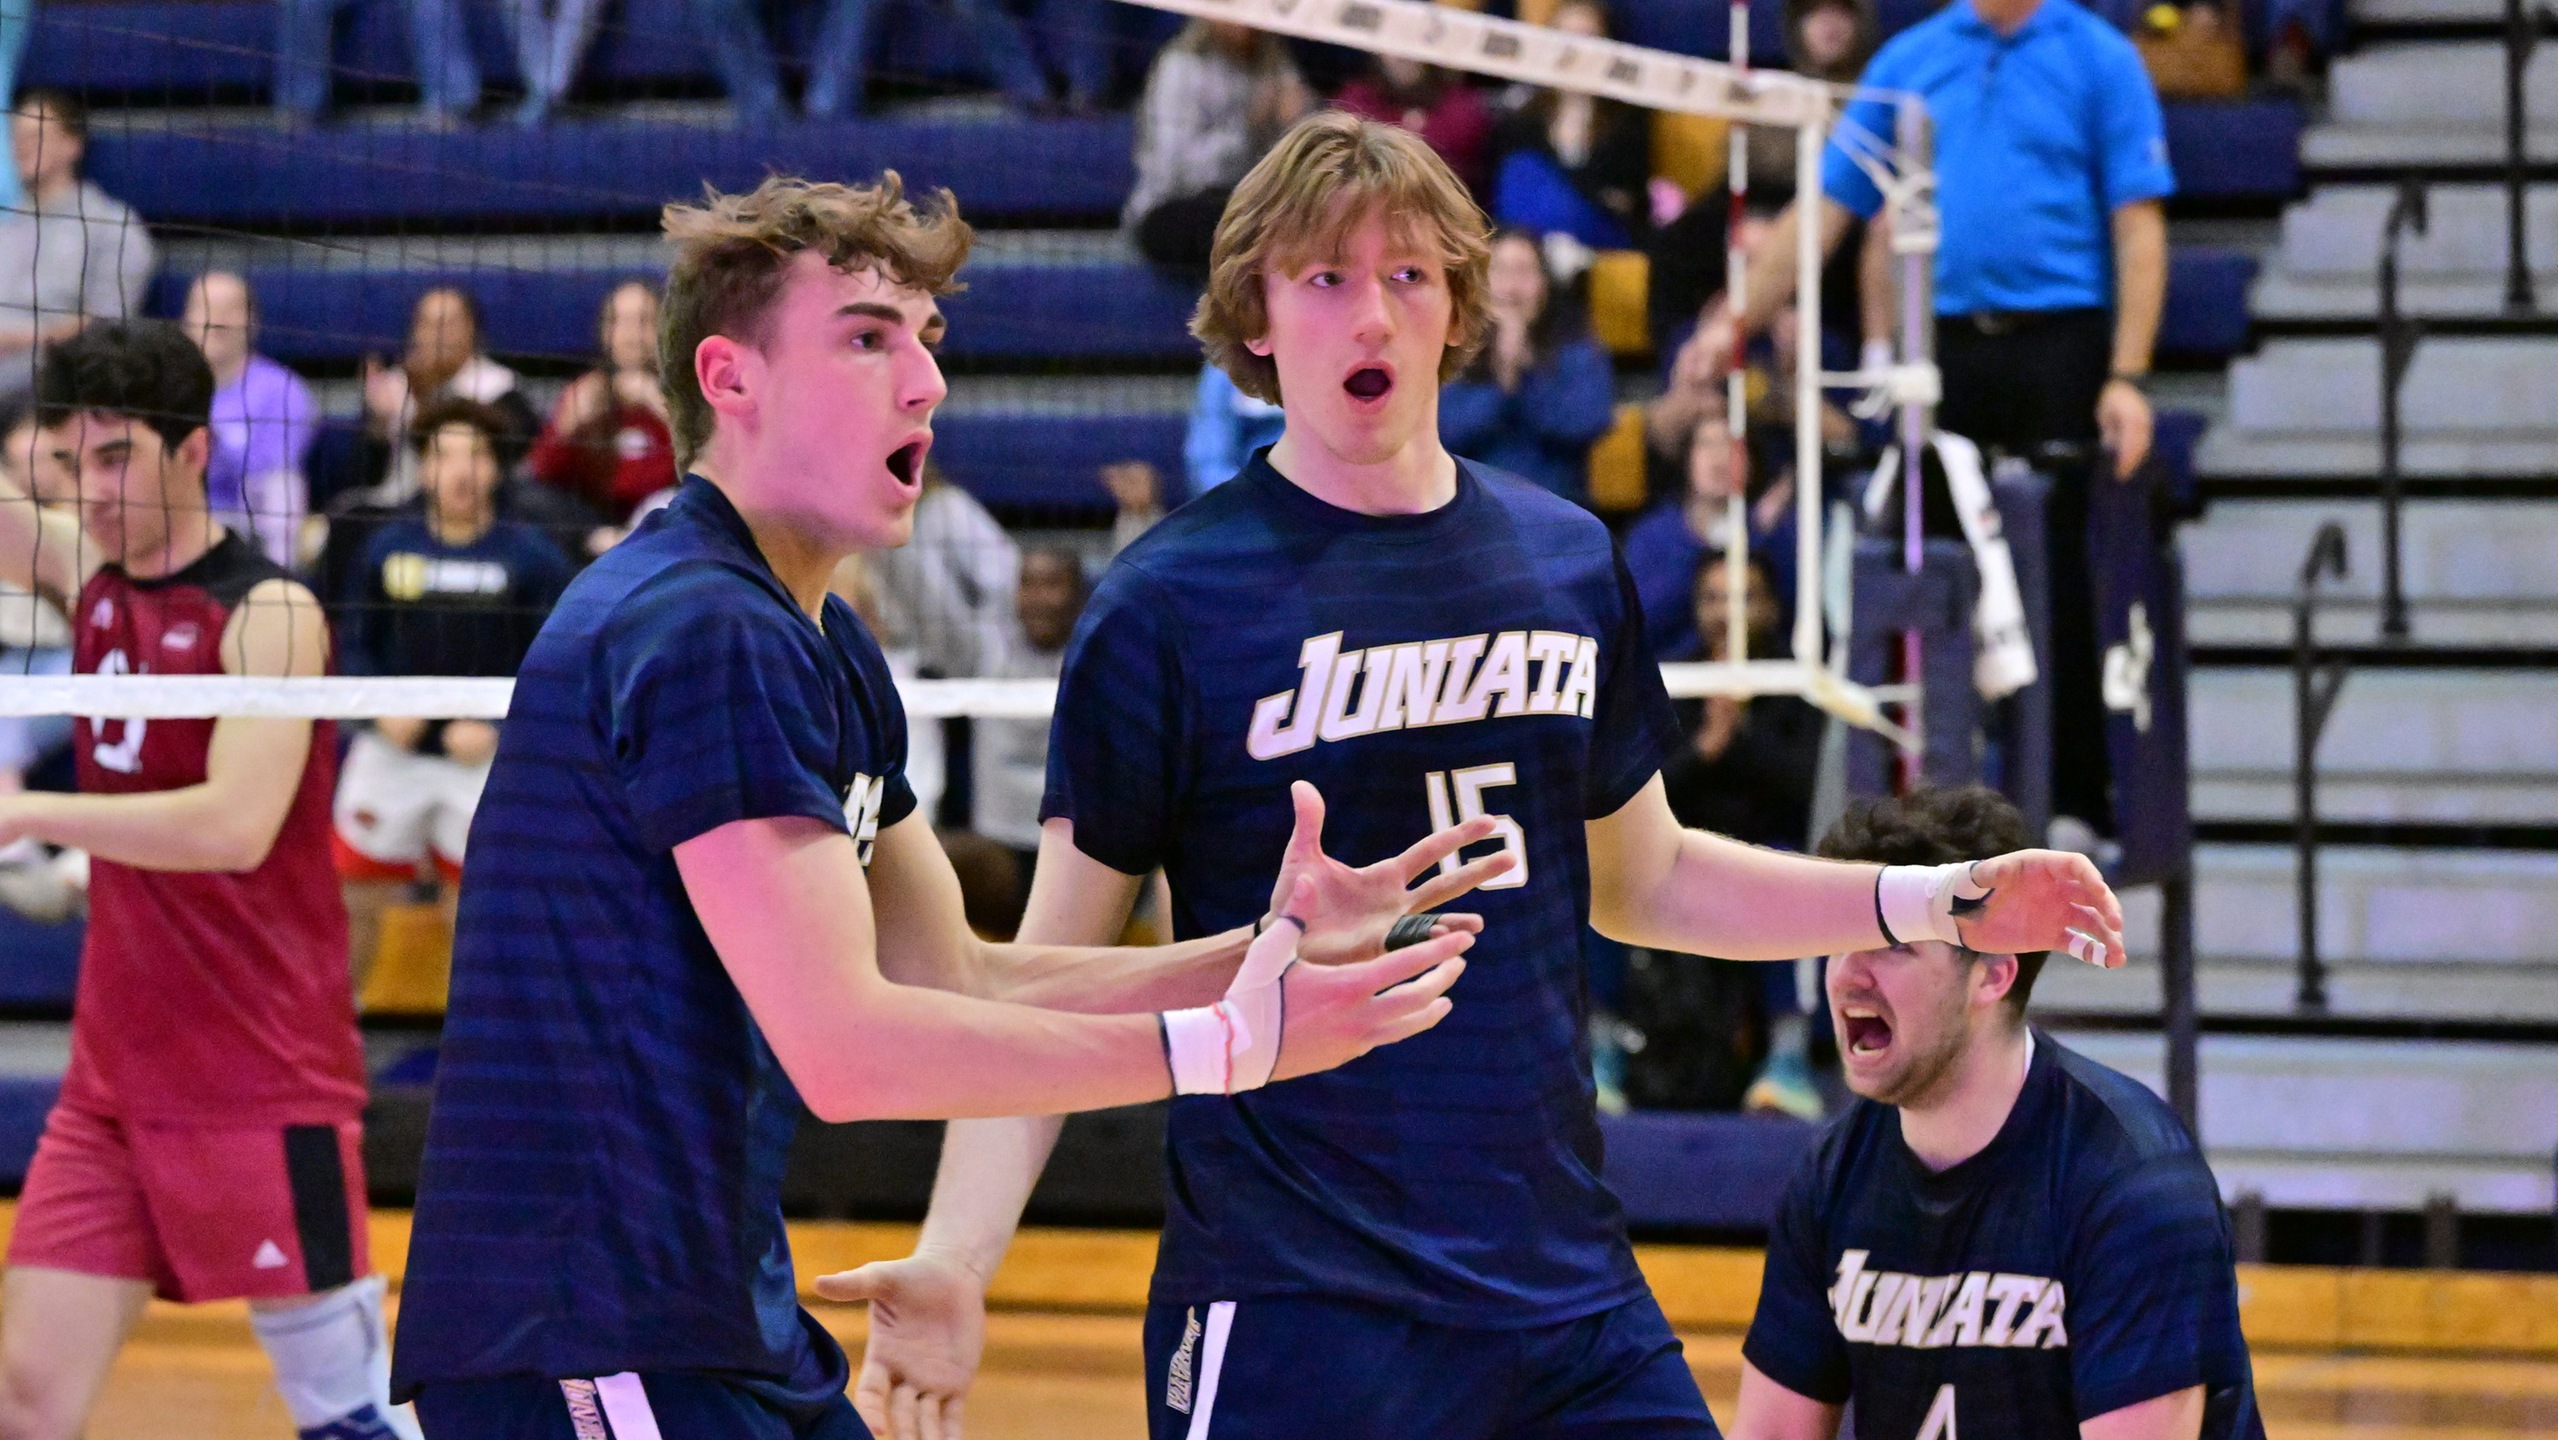 Men's Volleyball Moves to 5-1 in the CVC